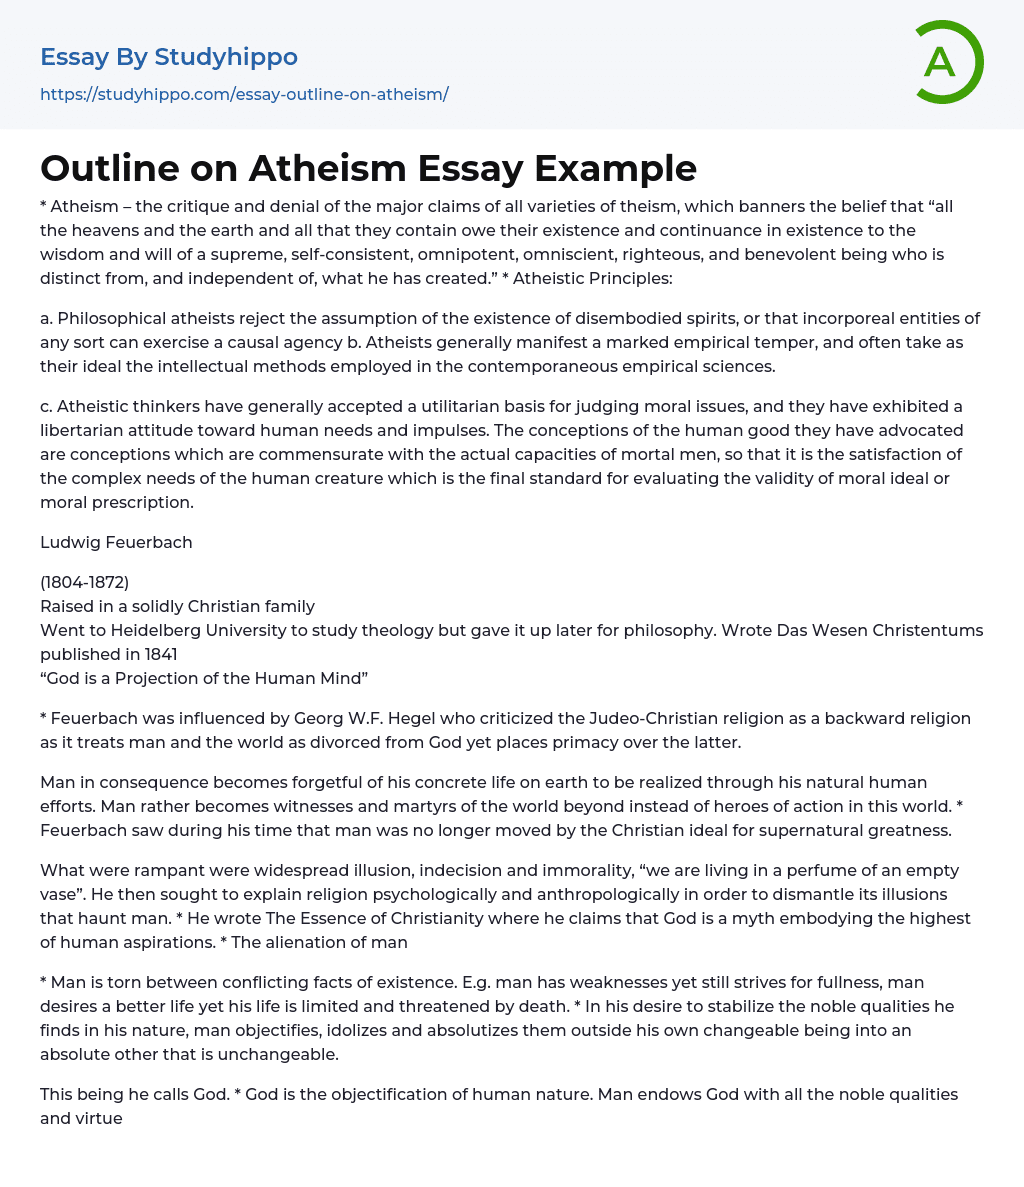 Outline on Atheism Essay Example